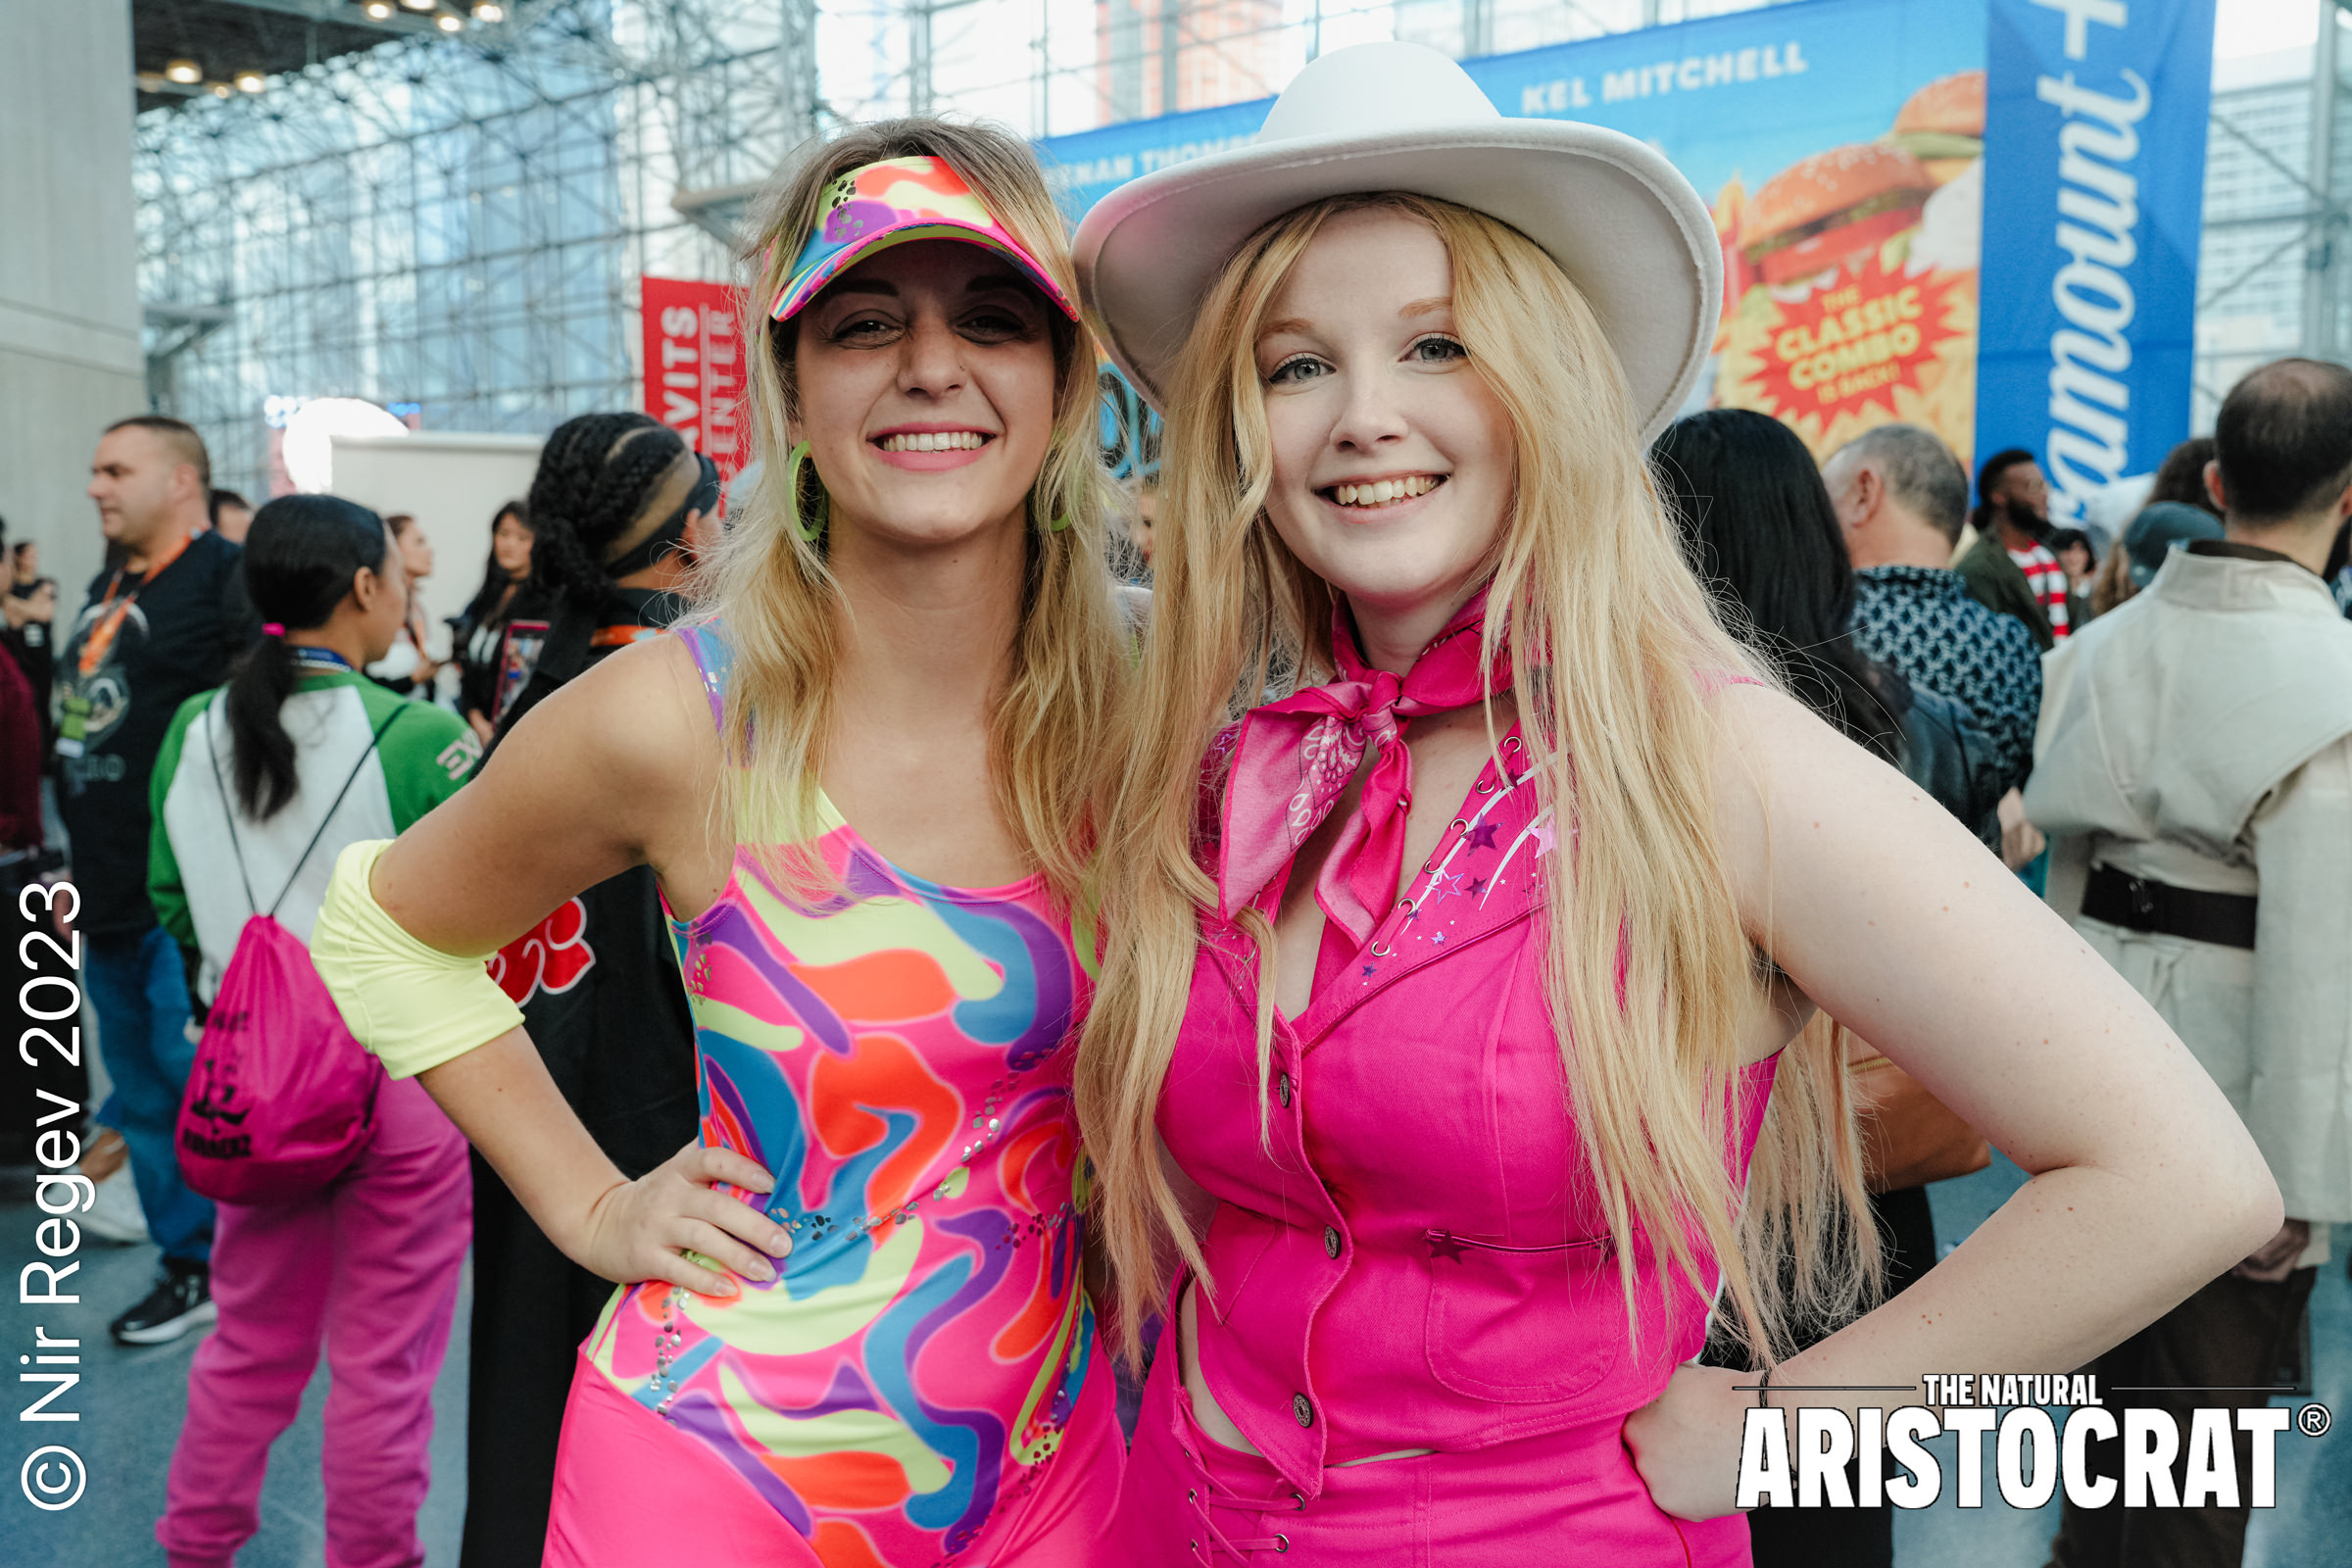 NYCC Barbie cosplayers at New York Comic Con 2023. Photo Credit: © Nir Regev 2023 - The Natural Aristocrat®